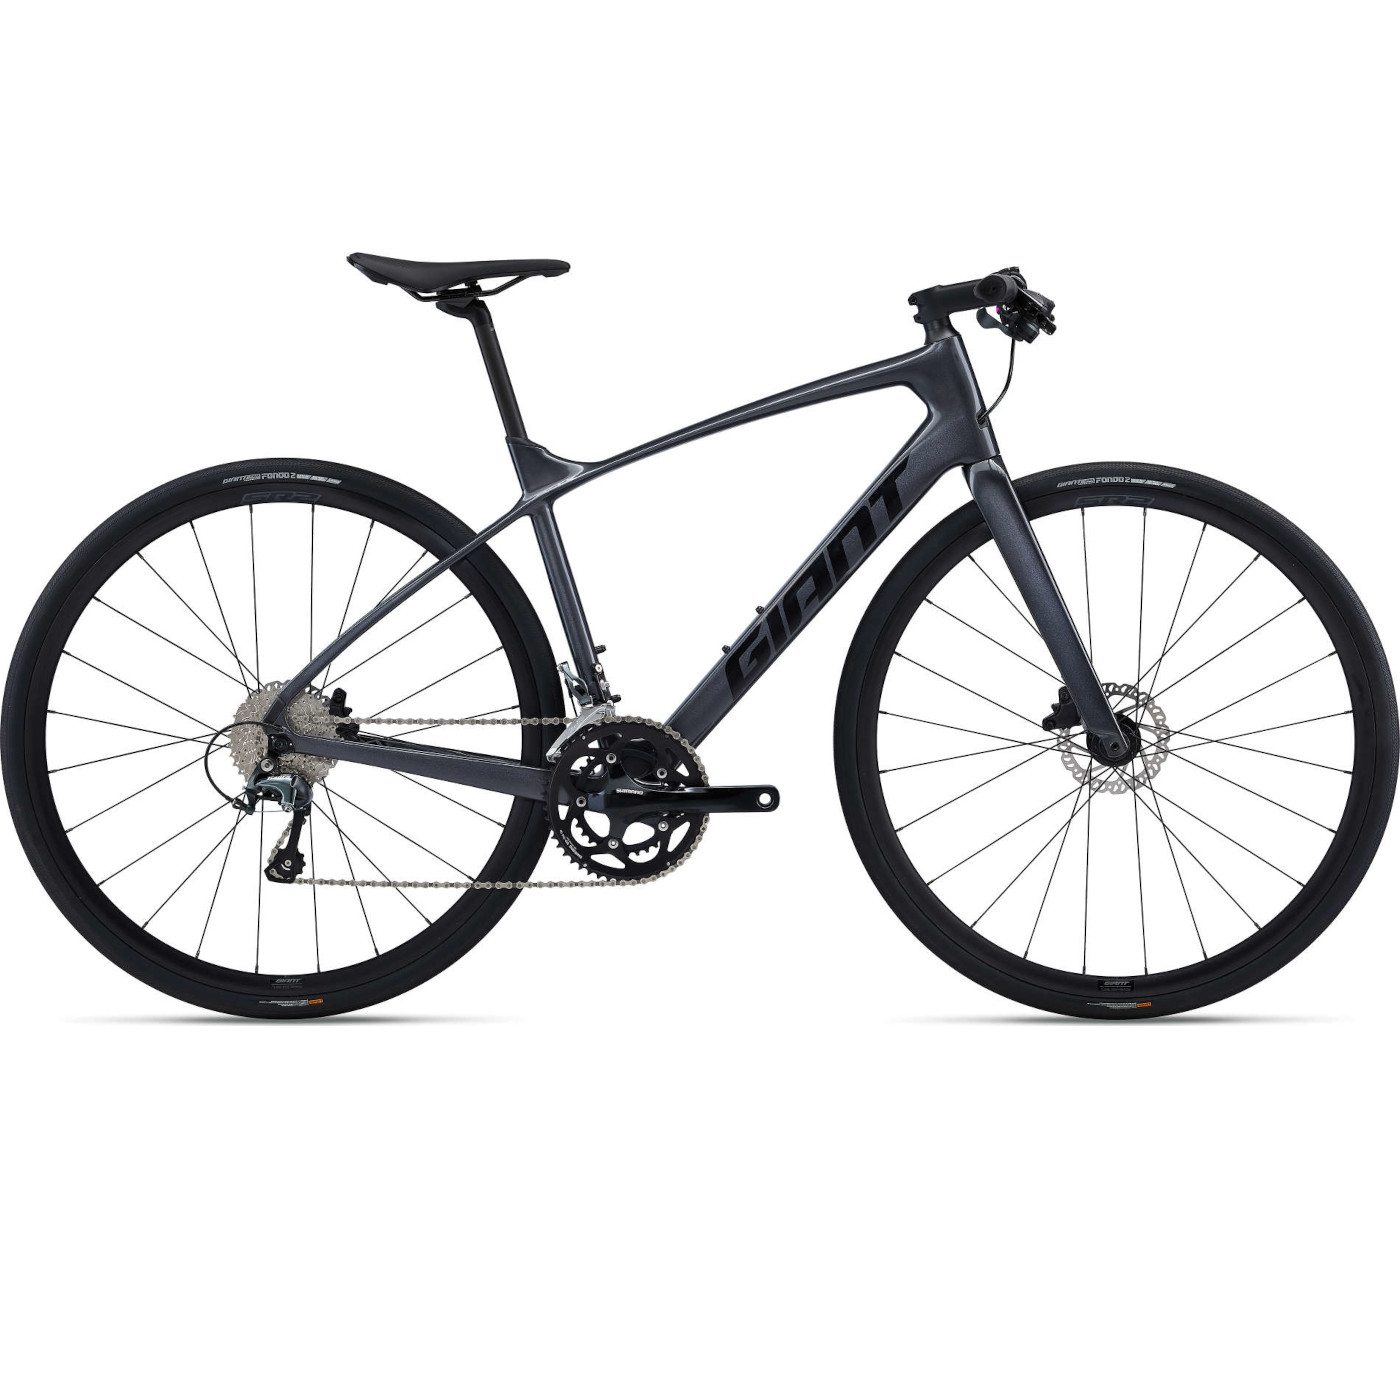 Picture of Giant FASTROAD ADVANCED 2 - Shimano Tiagra Carbon Fitness Bike - 2022 - cold iron